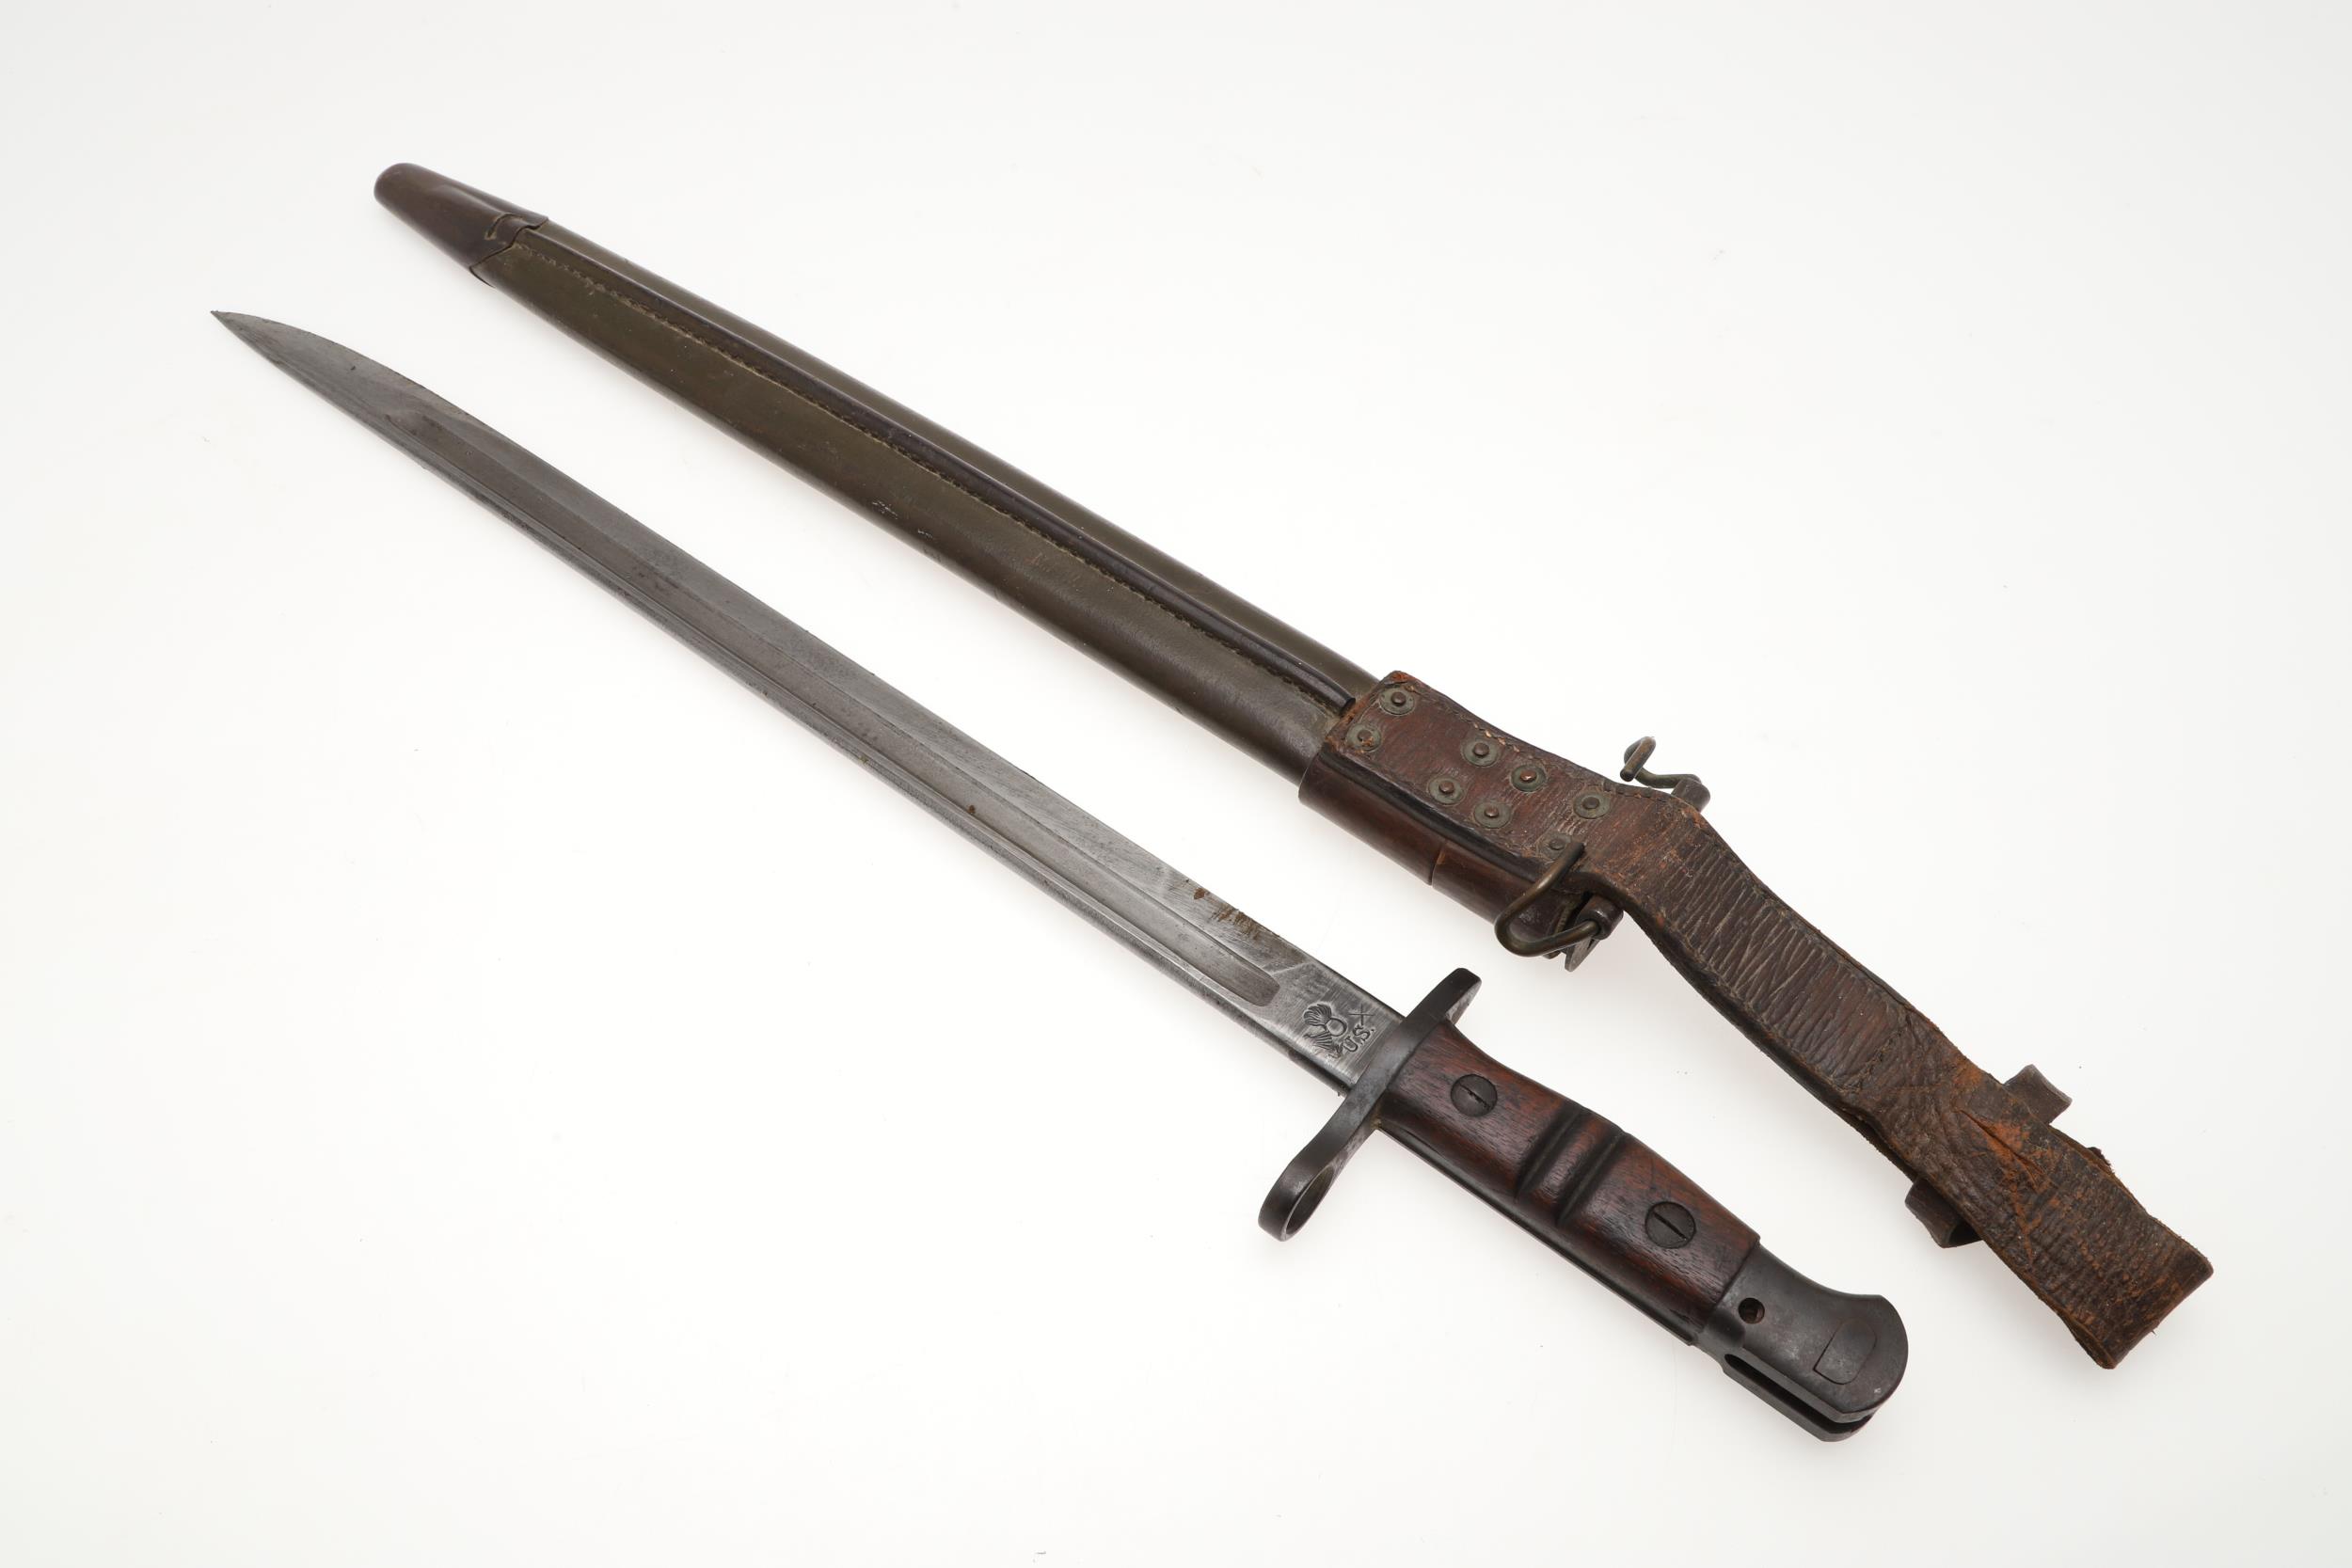 AN AMERICAN REMINGTON FIRST WORLD WAR 1917 PATTERN BAYONET AND SCABBARD. - Image 5 of 8